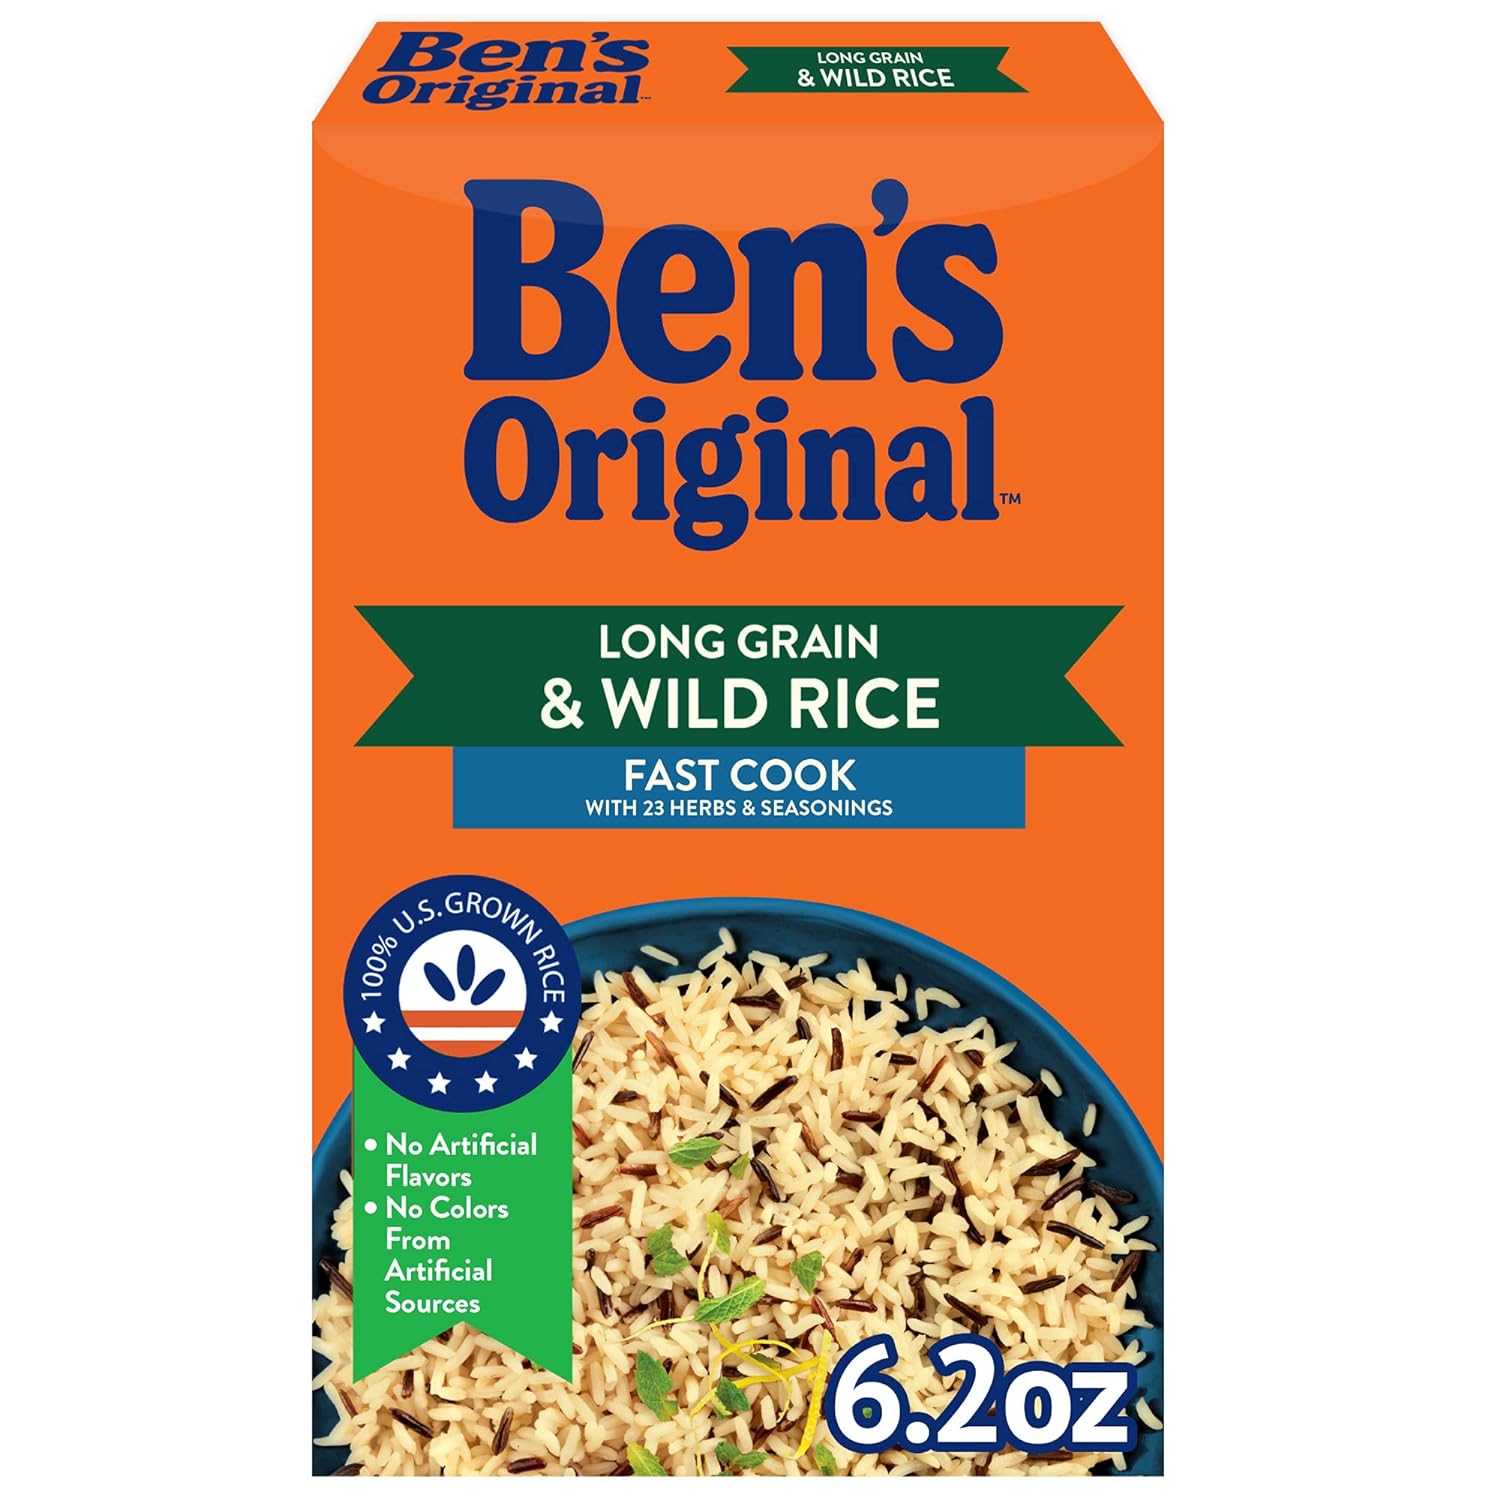 BEN'S ORIGINAL Long Grain Rice and Wild Rice, Fast Cook Rice, 6.2 OZ Box (Pack of 12)